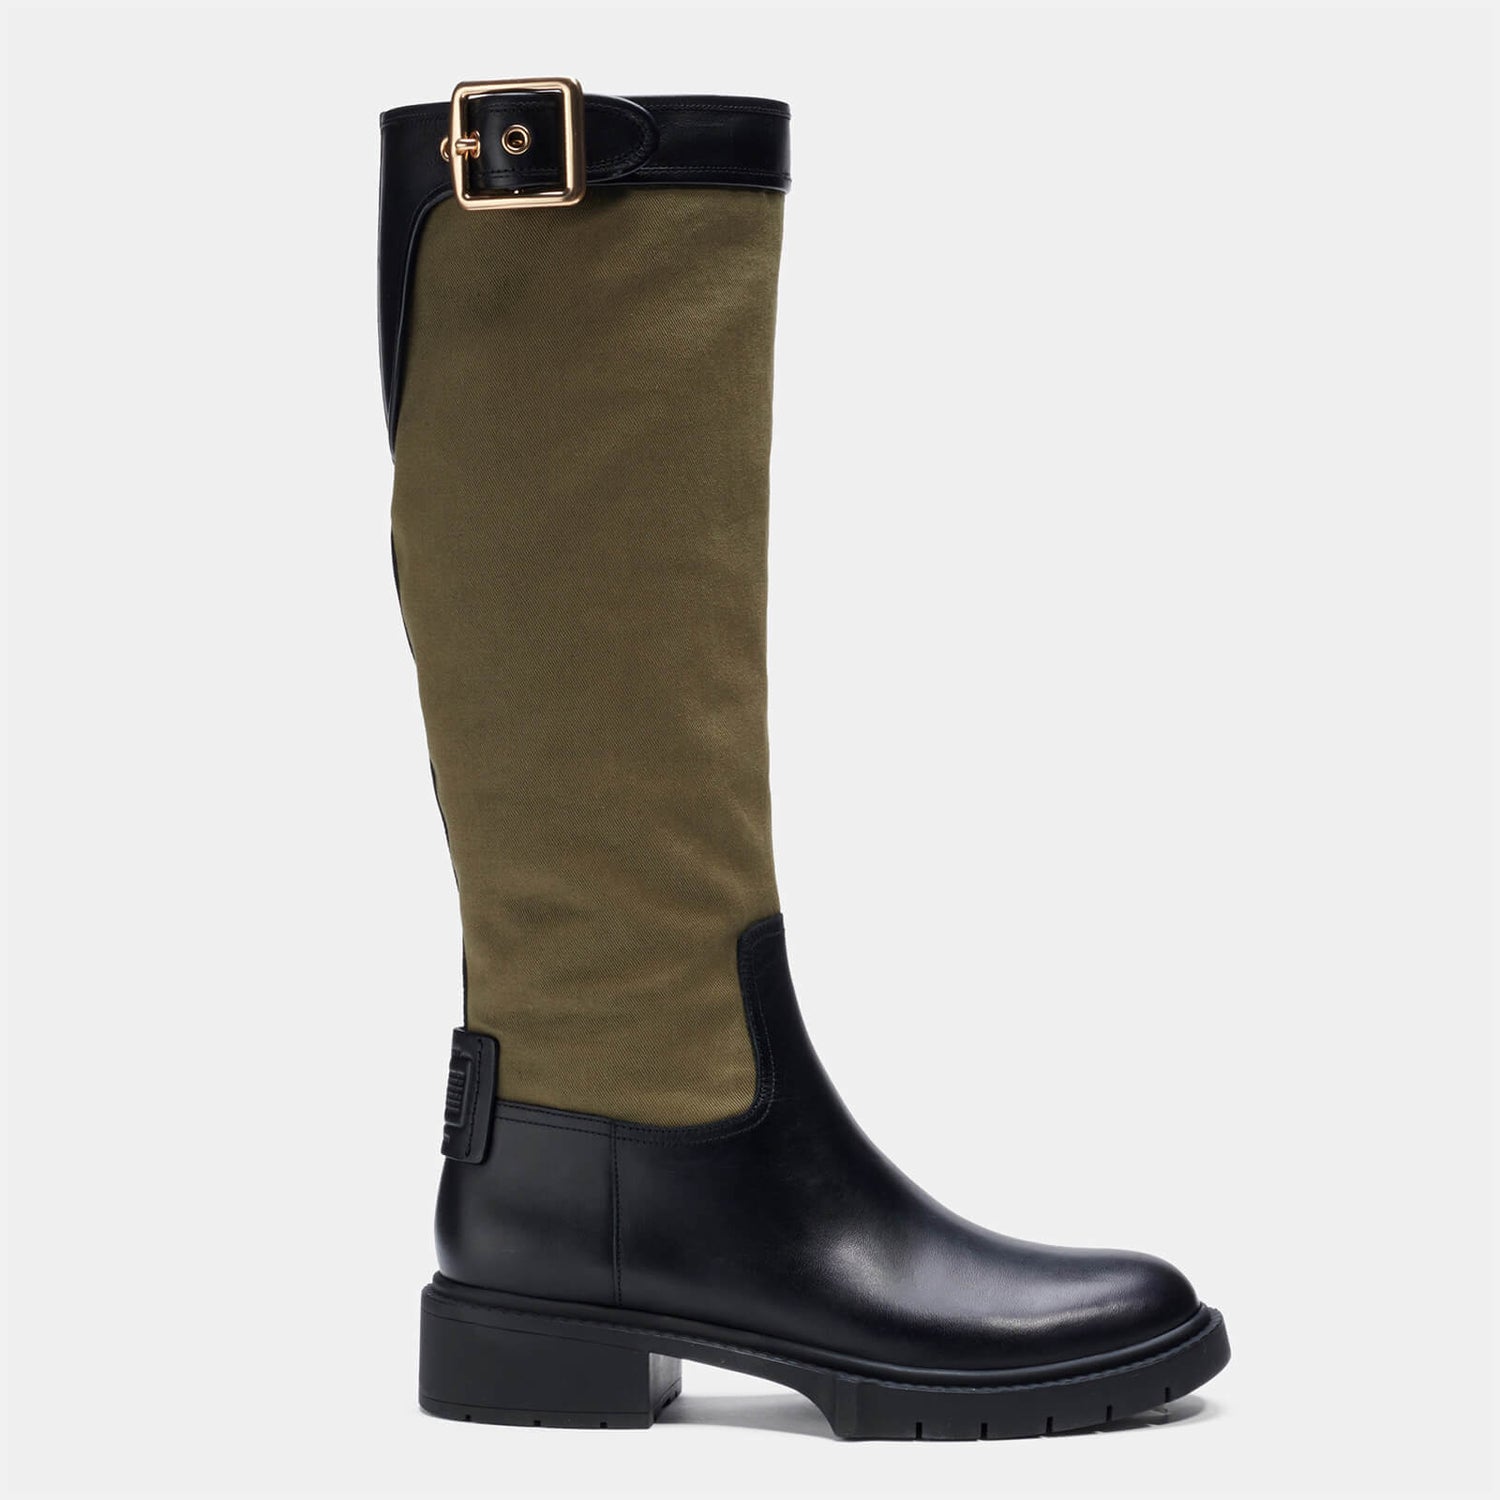 Coach Women's Leigh Leather Knee High Boots - Army Green - UK 3